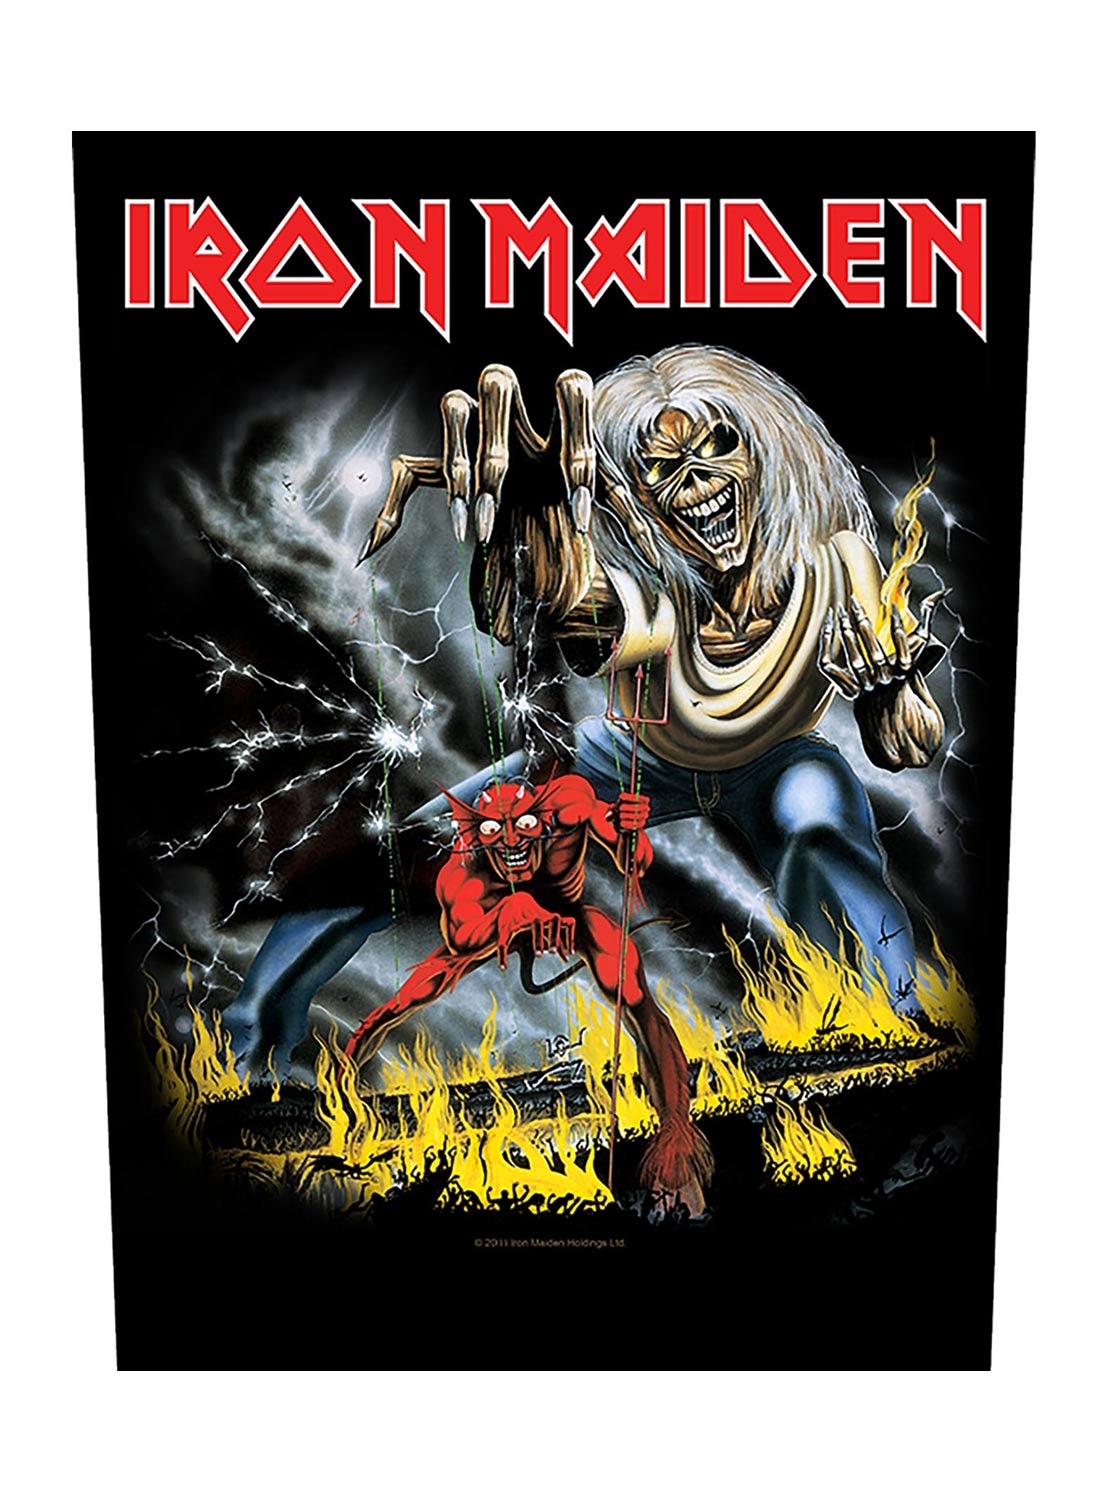 Iron Maiden Number Of The Beast Back Patch